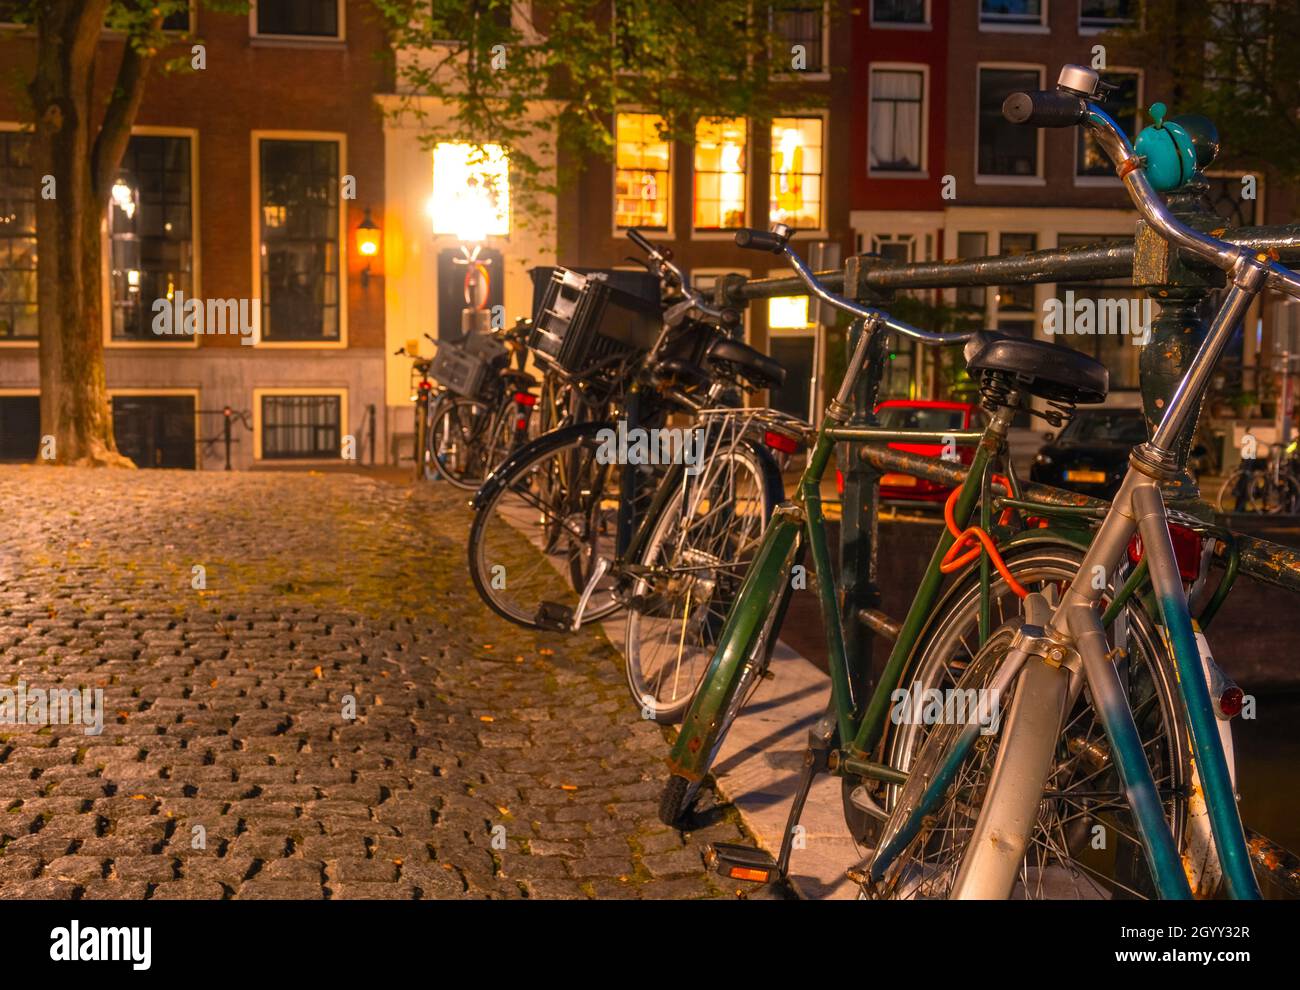 Netherlands. Night Amsterdam. Several bicycles are parked at the canal fence on the cobbled pavement Stock Photo